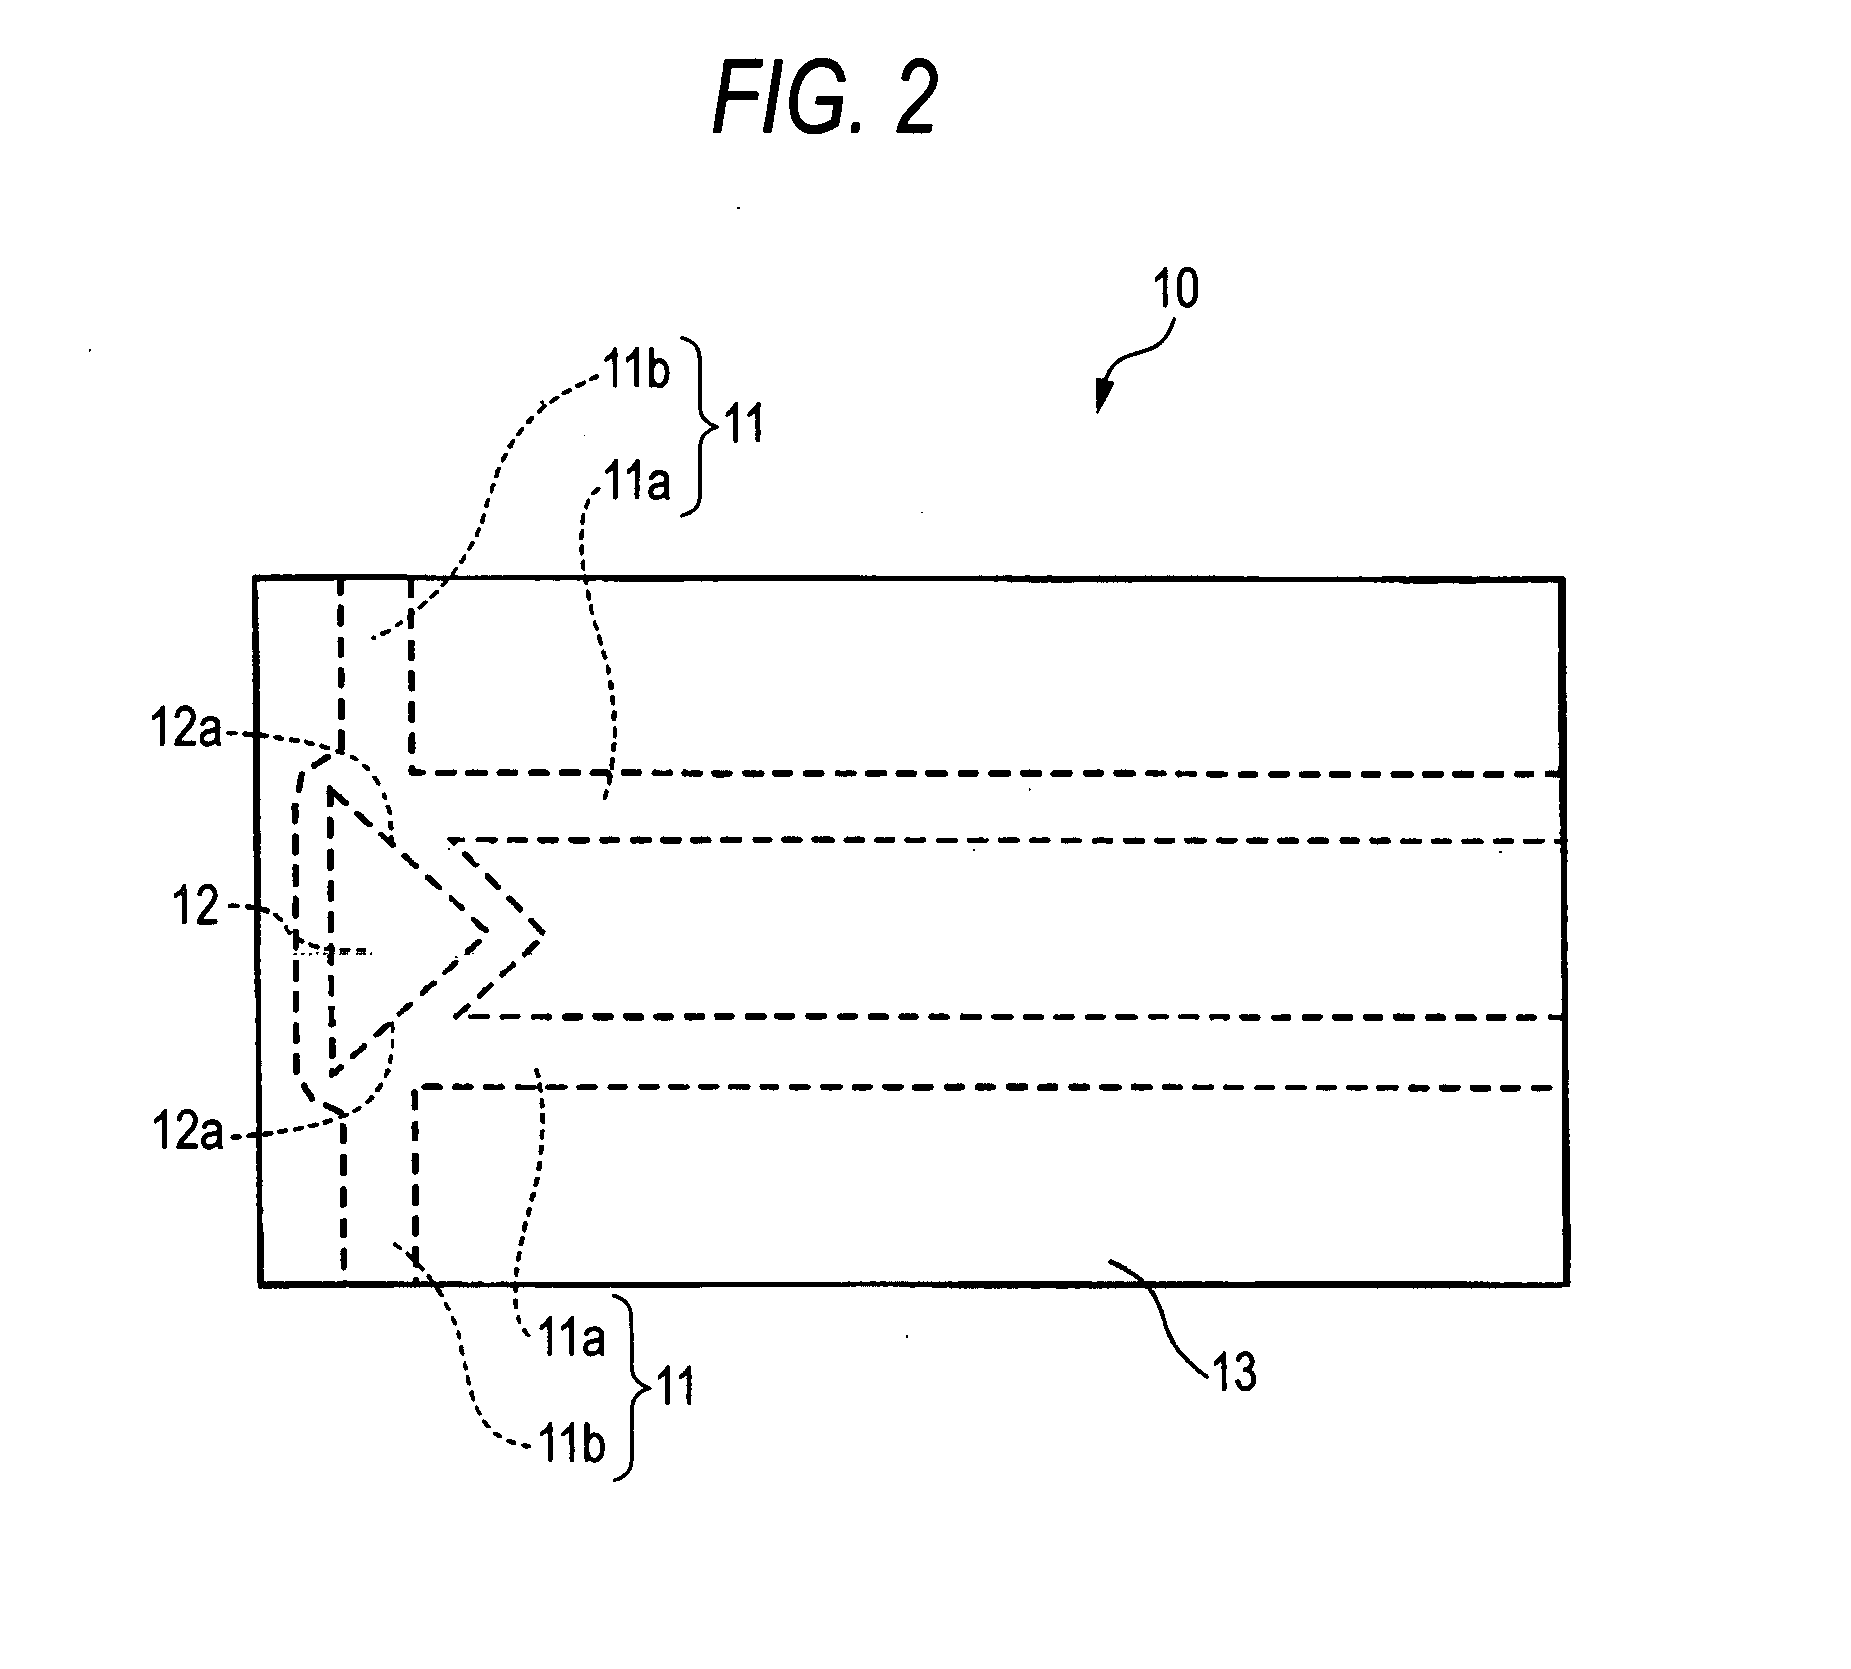 Flexible optical waveguide film, optical transceiver module, multi-channel optical transceiver module, and method of manufacturing flexible optical waveguide film